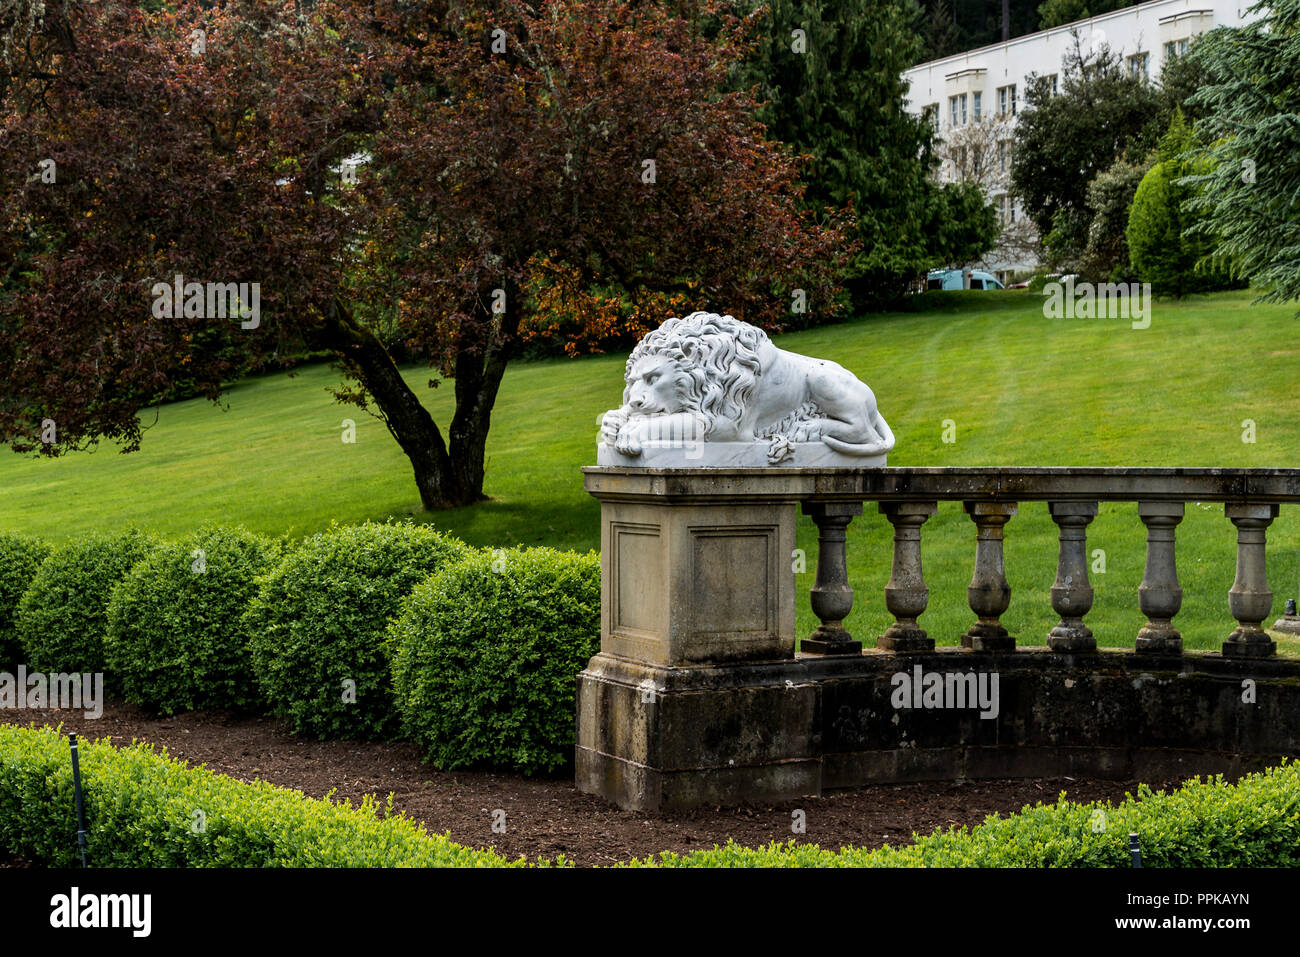 Stone lion, Hatley Park, Colwood, Greater Victoria, British Columbia, Canada Stock Photo